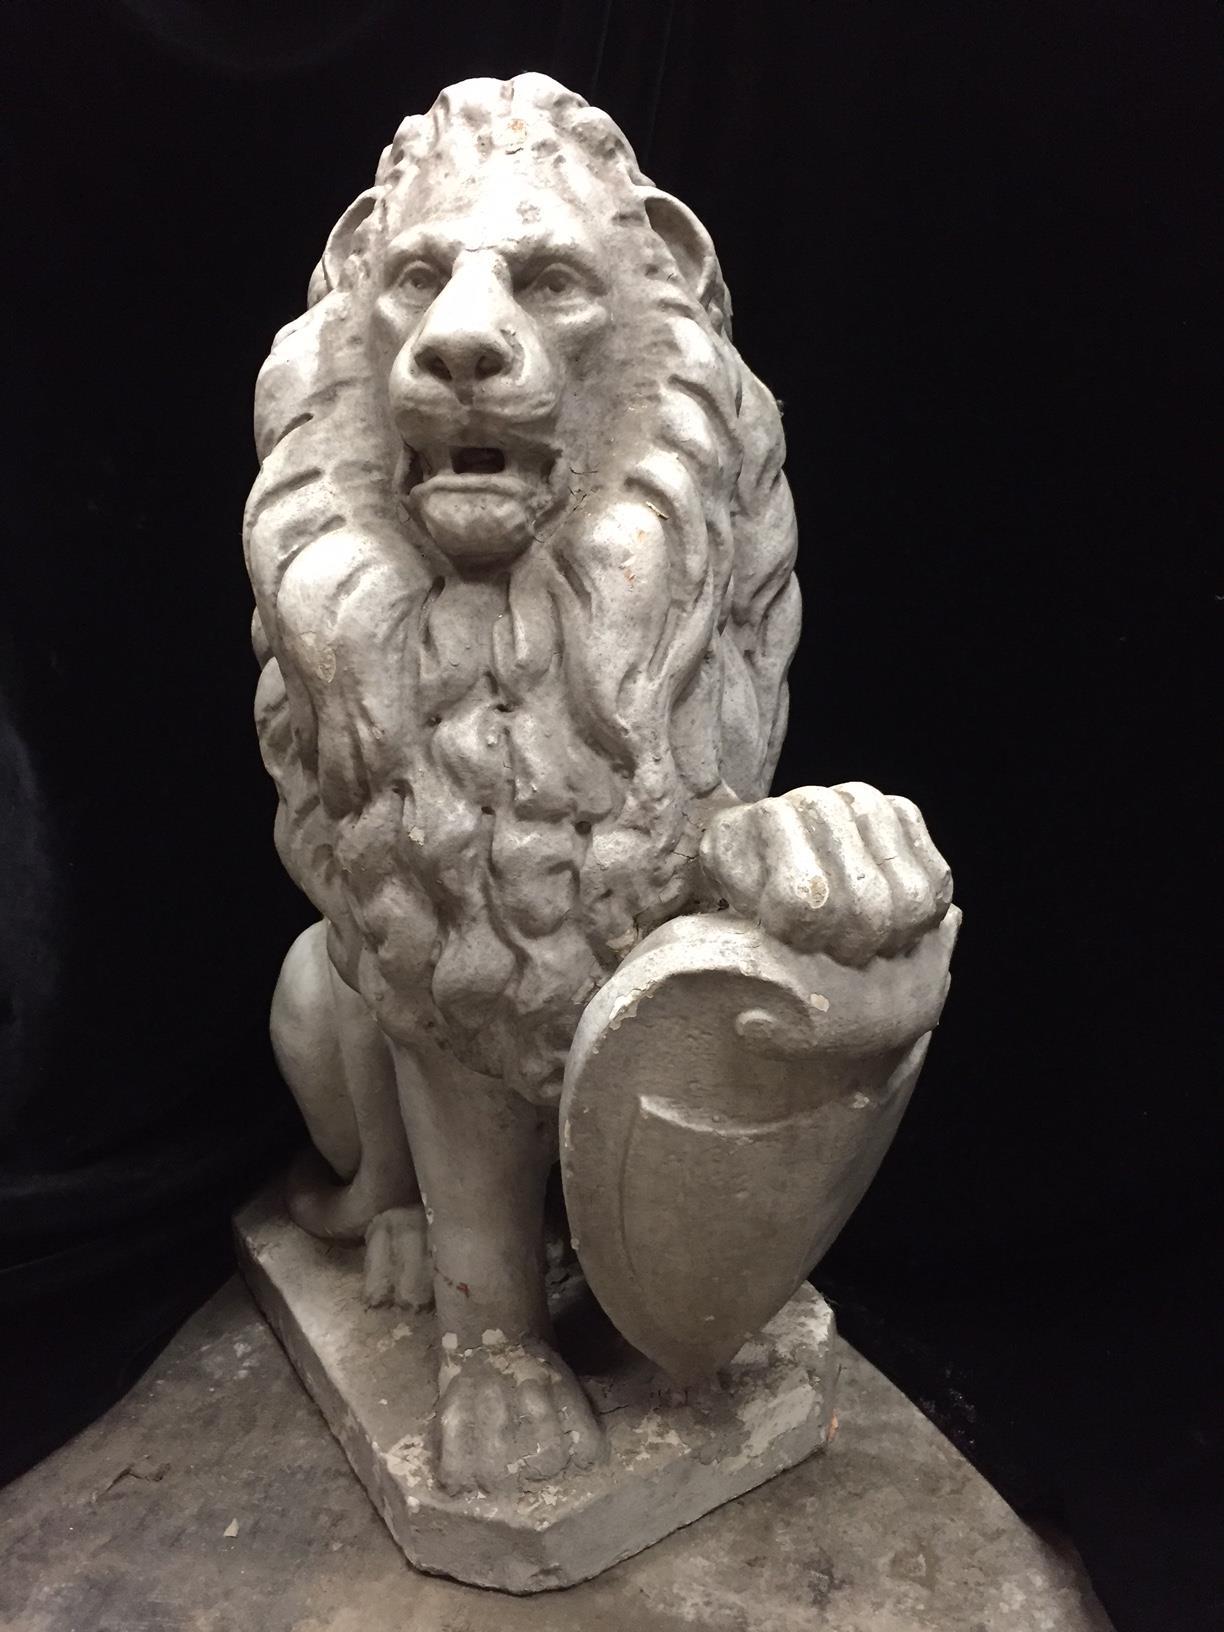 Charming English cast stone lion, 20th century.
Meticulous attention has been giving to every detail..
Can be used indoor or out door.